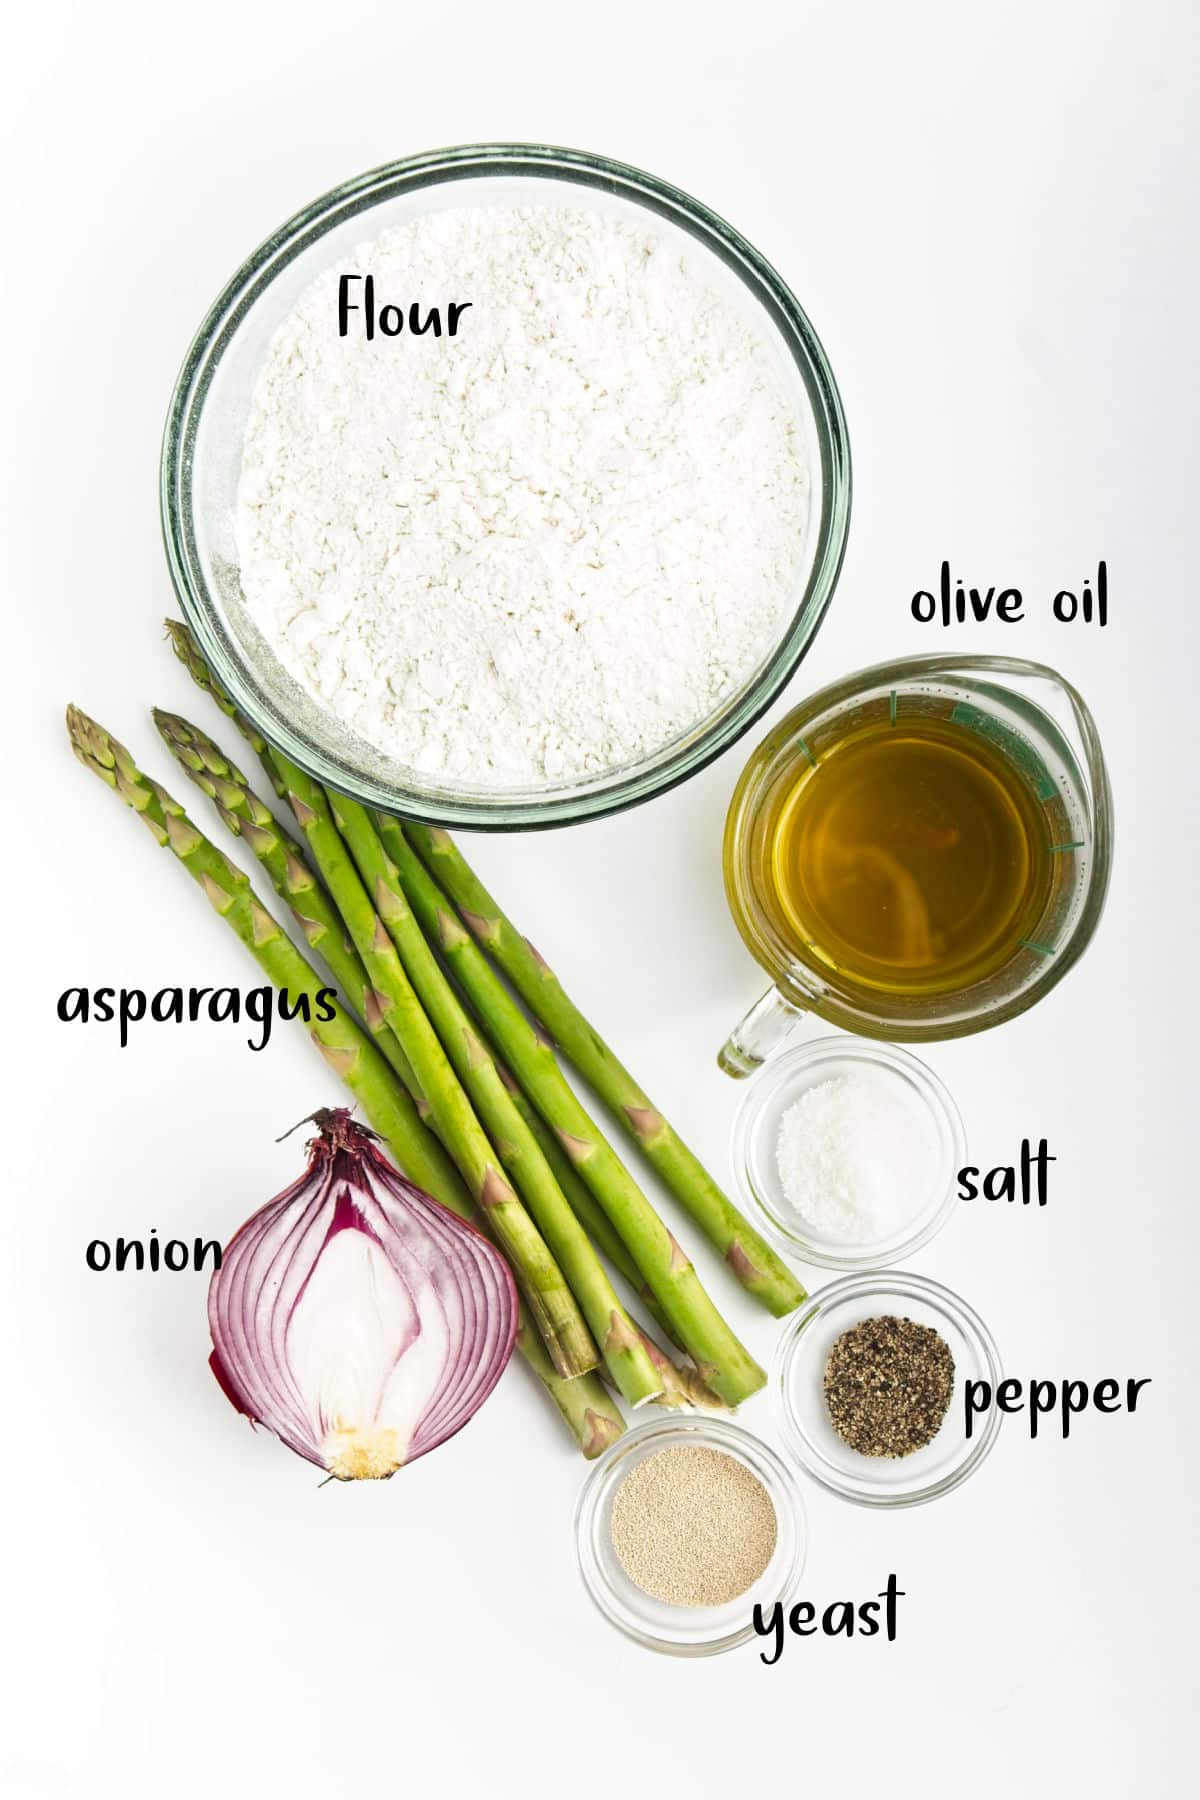 Ingredients for focaccia bread with asparagus and red onions.